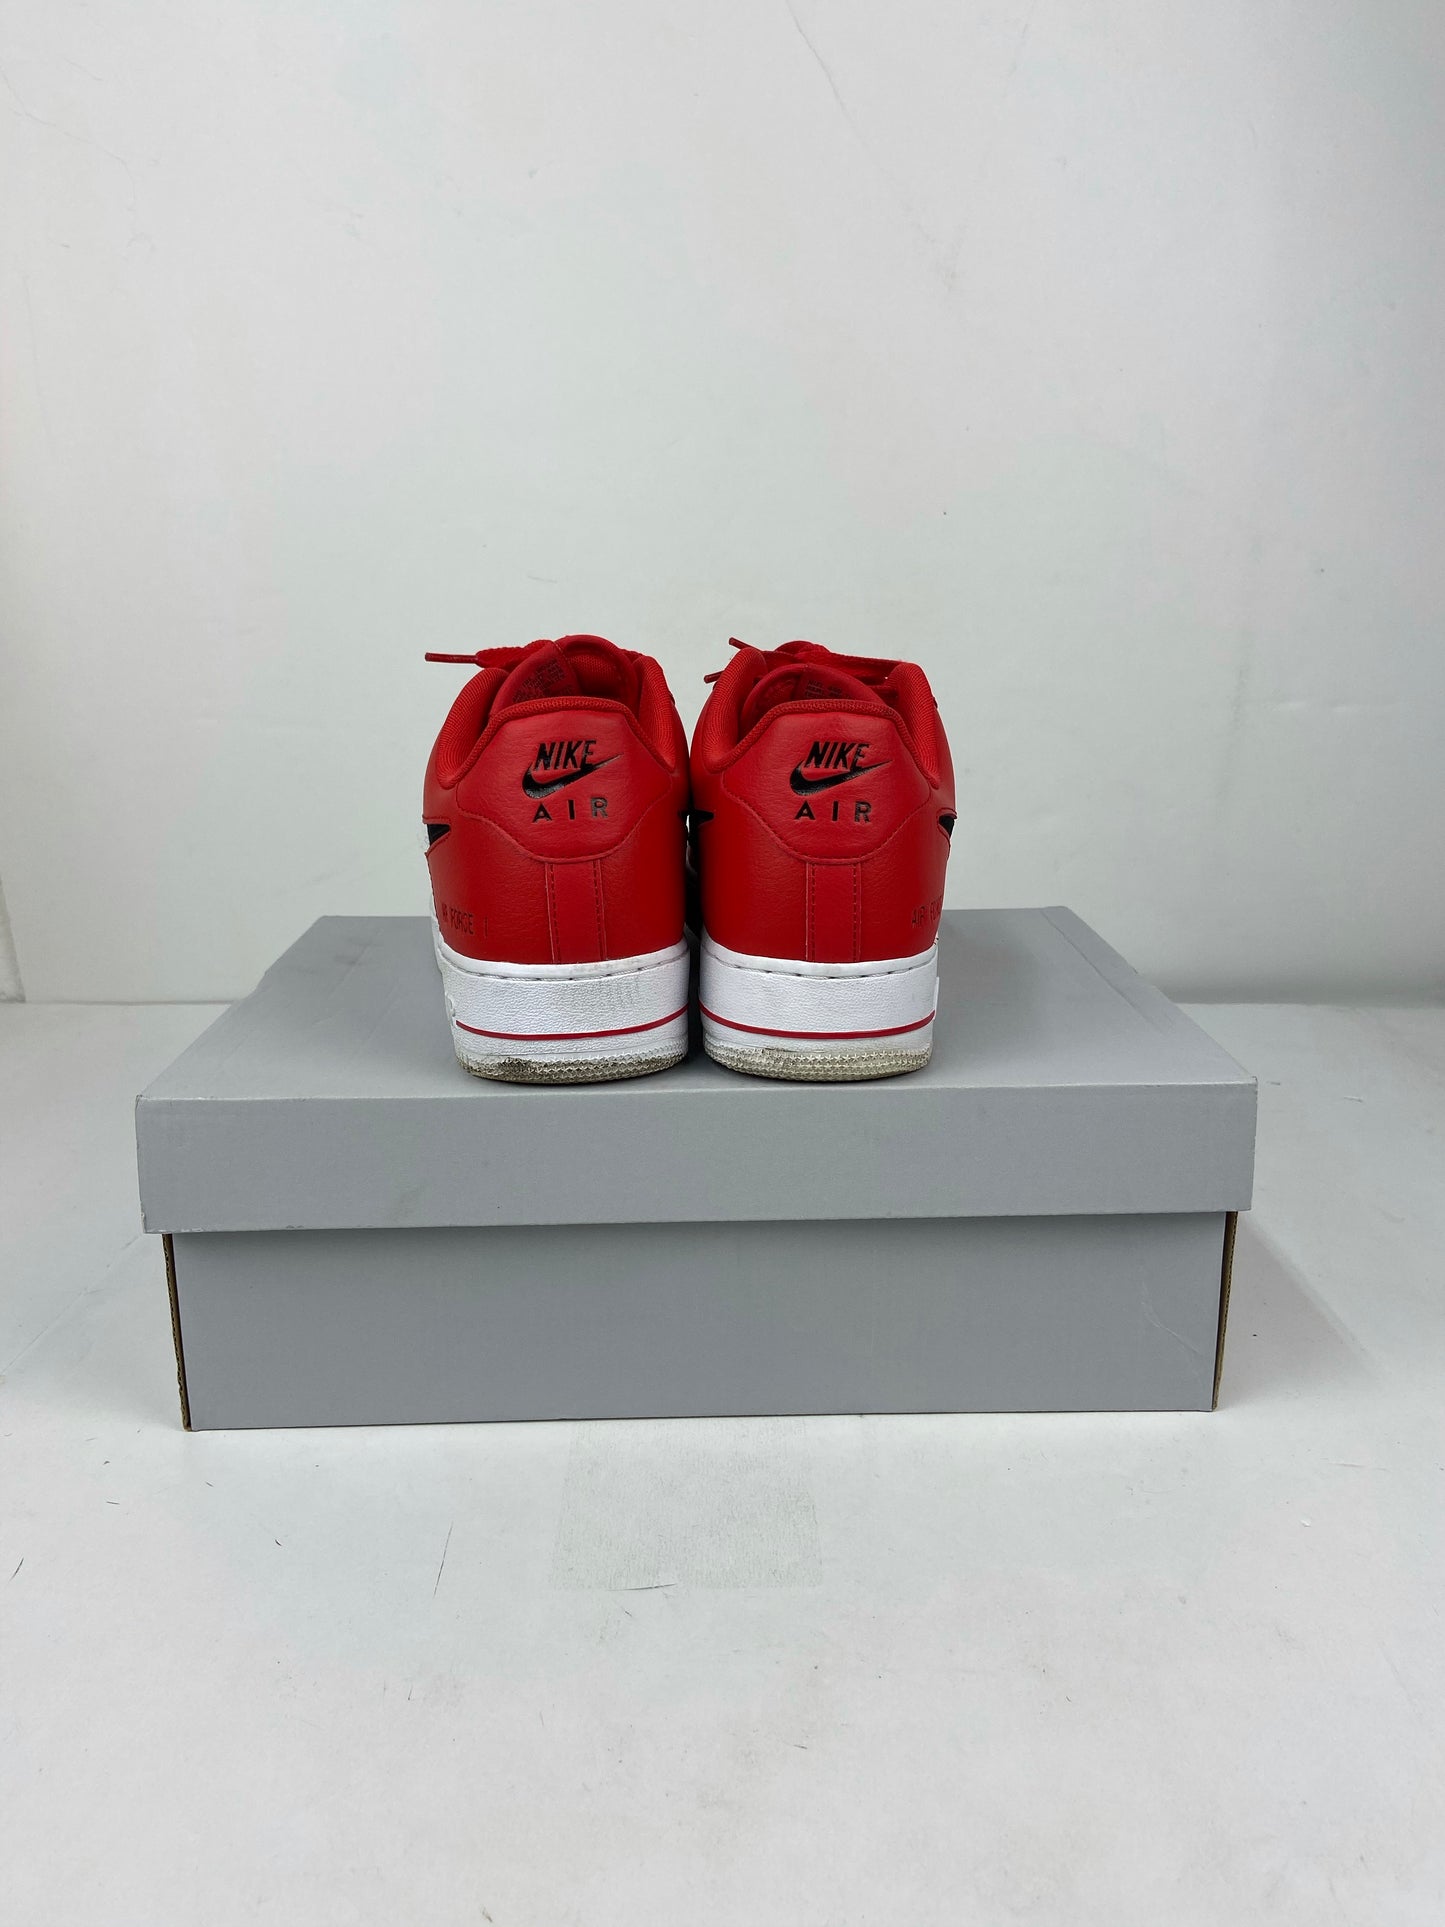 Used Air Force 1 '07 LV8 'Cut Out Swoosh - University Red' Sz 9.5